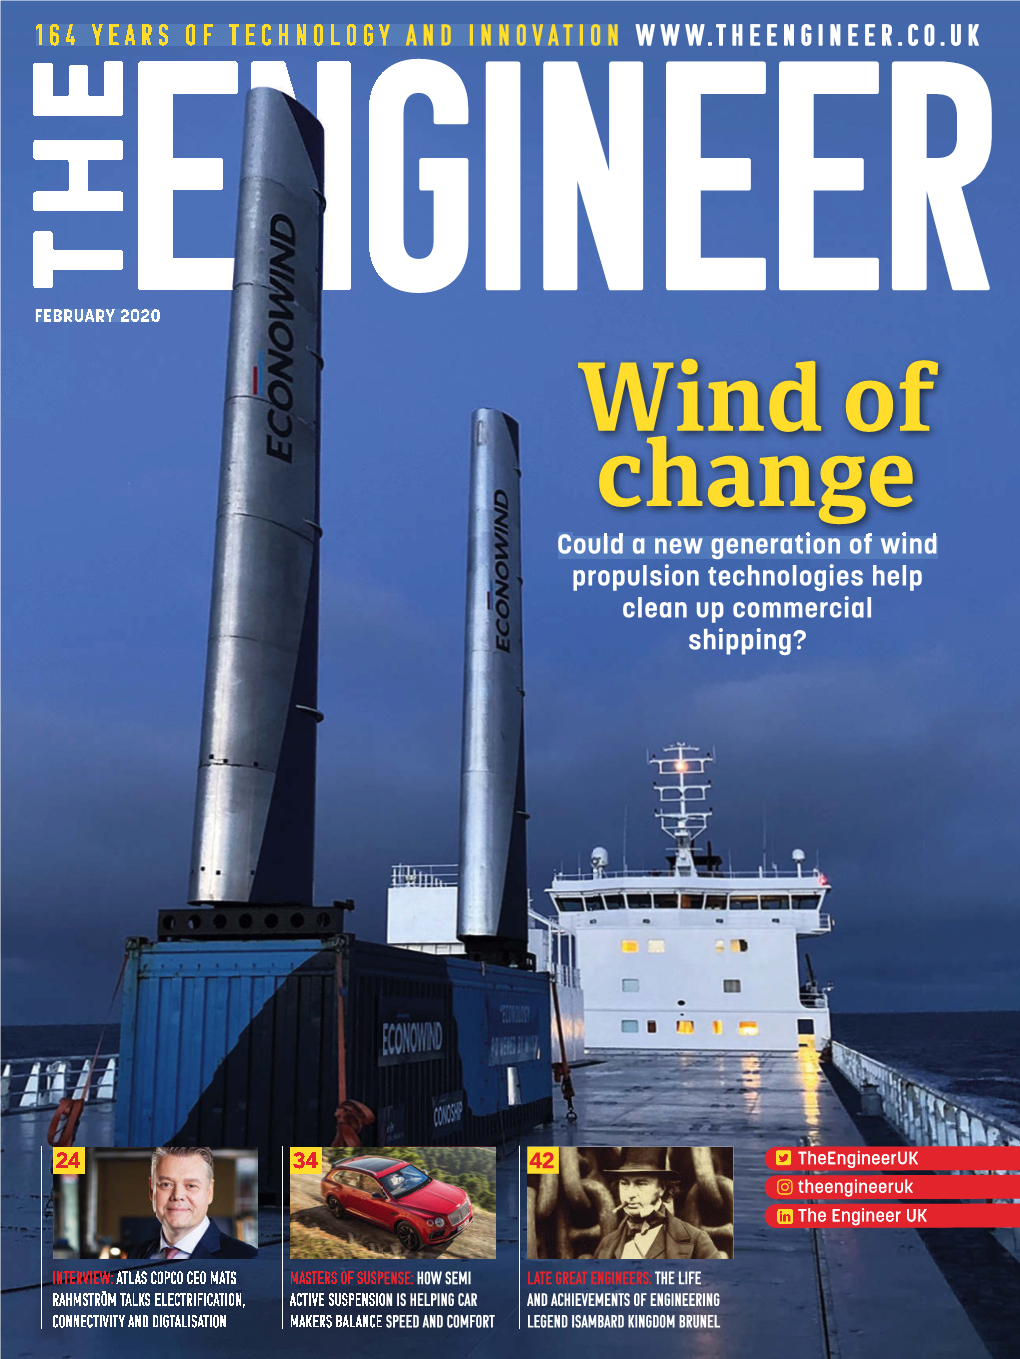 Wind of Change Could a New Generation of Wind Propulsion Technologies Help Clean up Commercial Shipping?